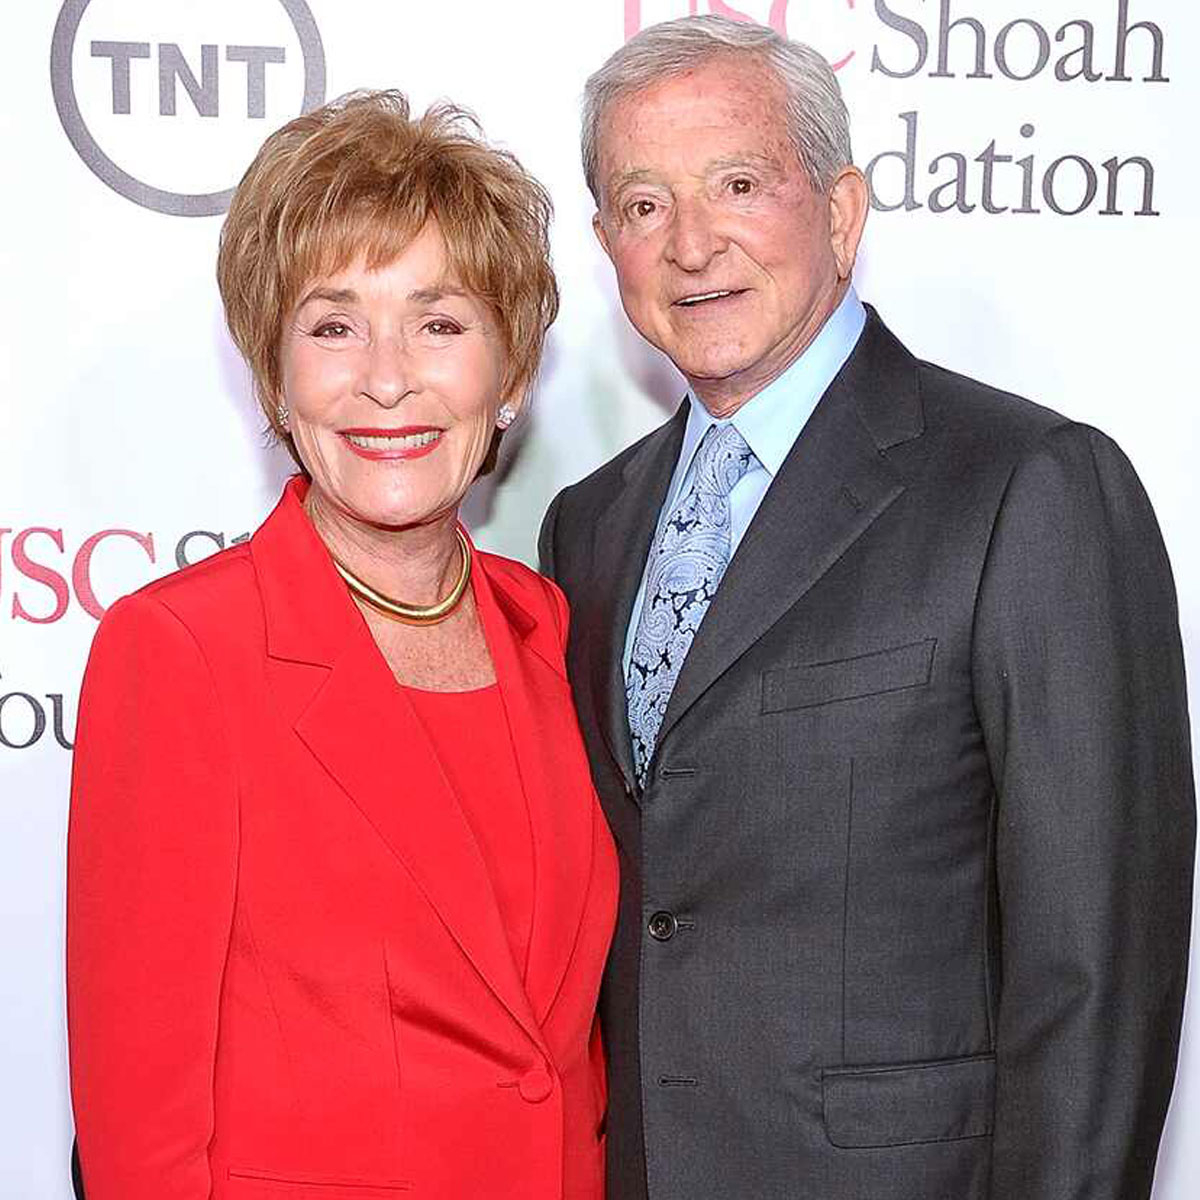 Inside the Winning Love Story of Judge Judy and Jerry Sheindlin - E! Online